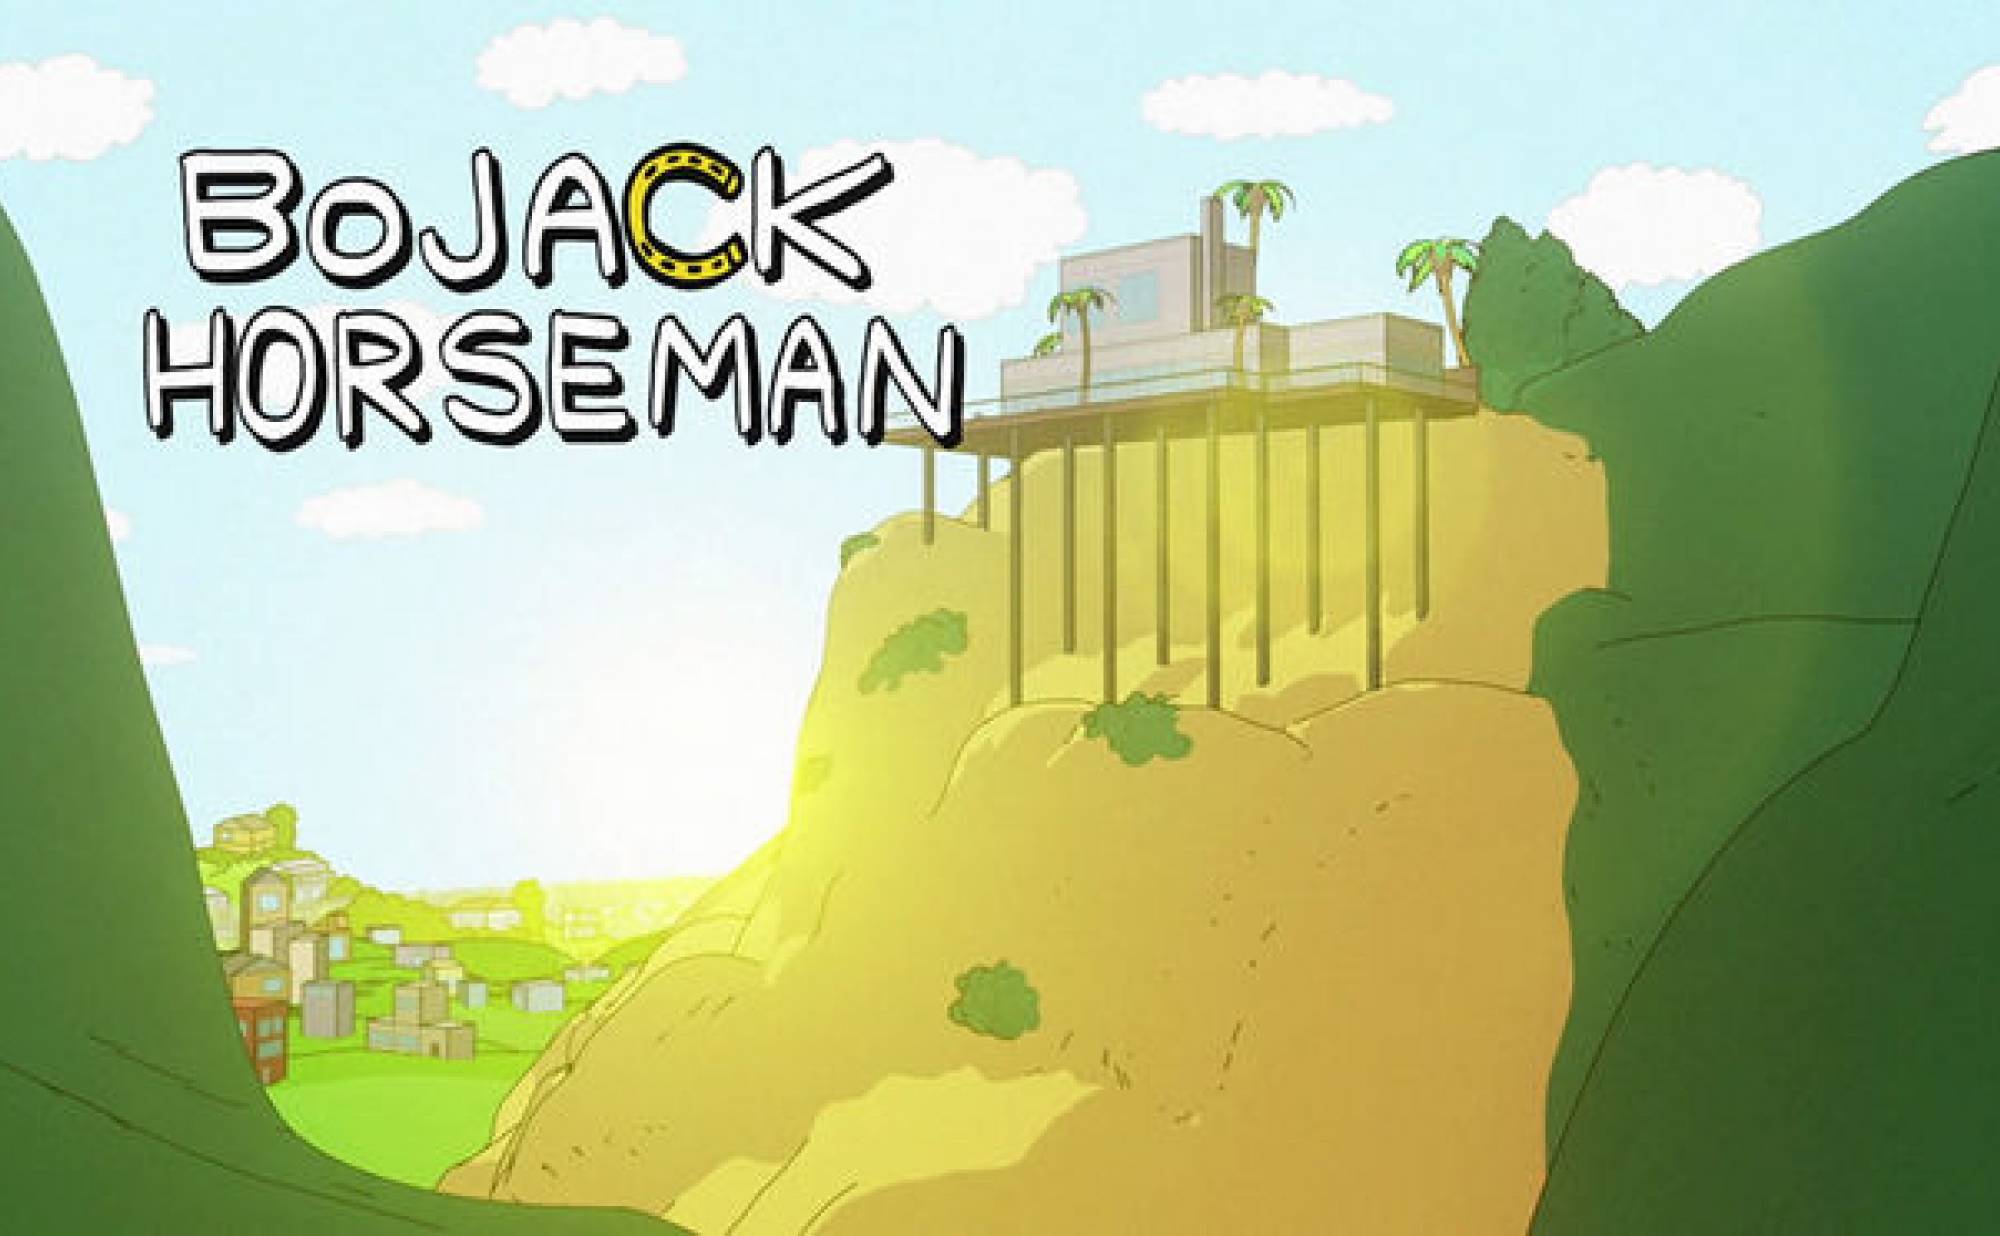 BoJack's house, much like his life, is in a precarious position.